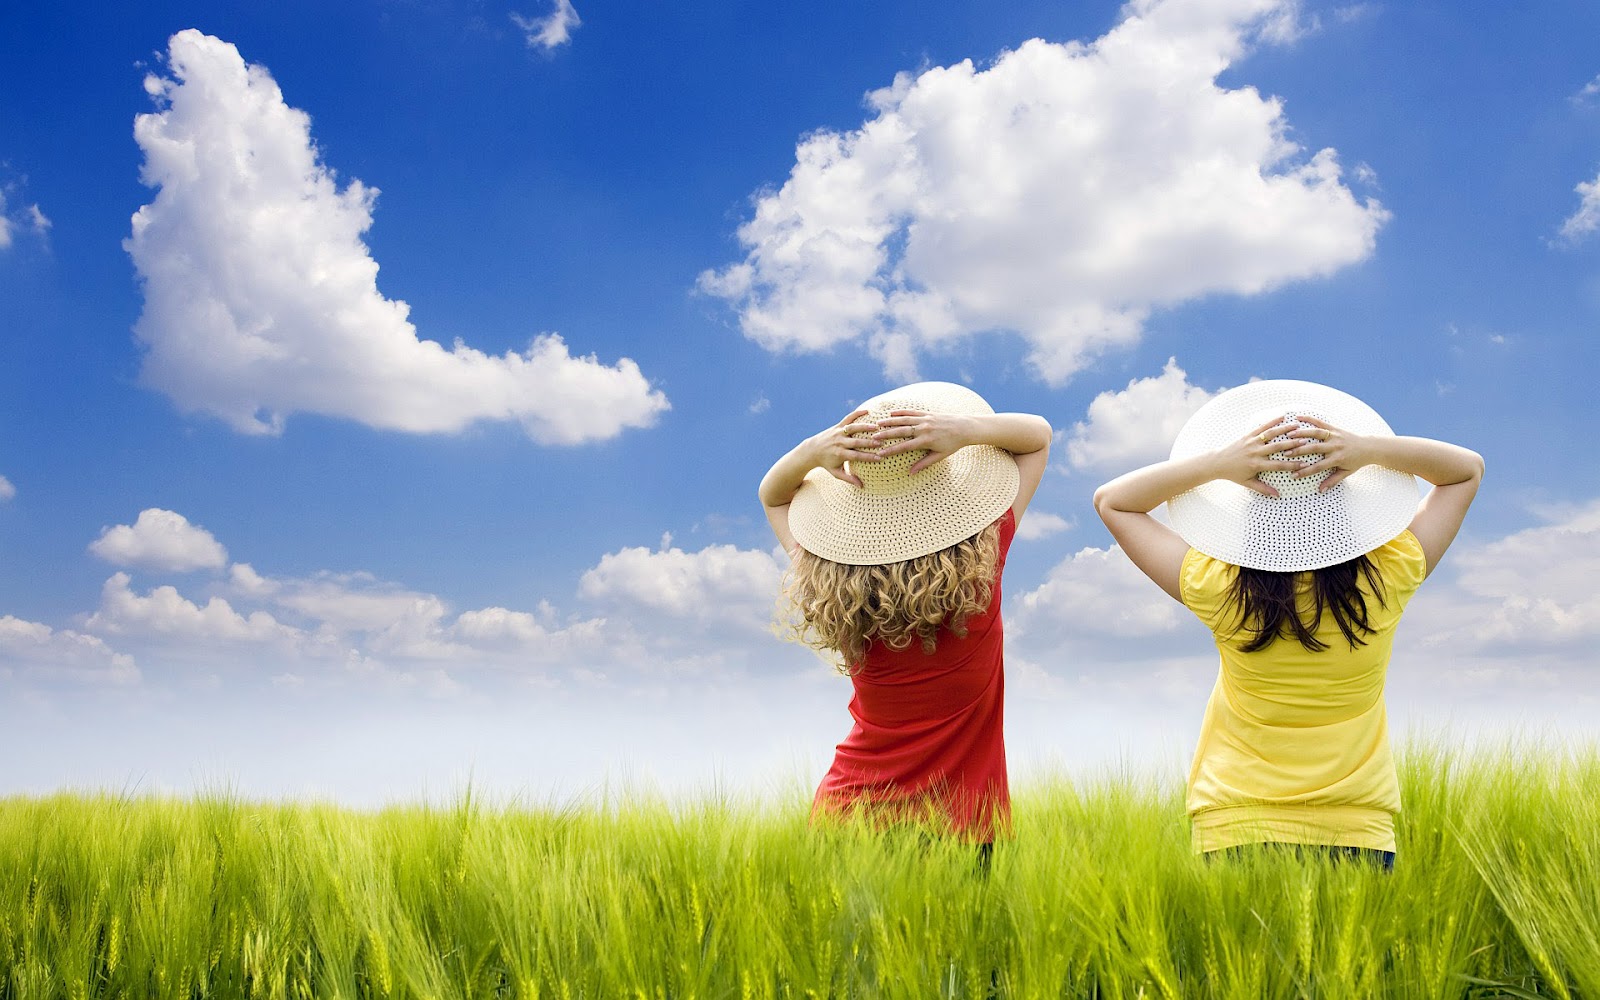 kids photos wallpapers,people in nature,sky,grass,grass family,happy